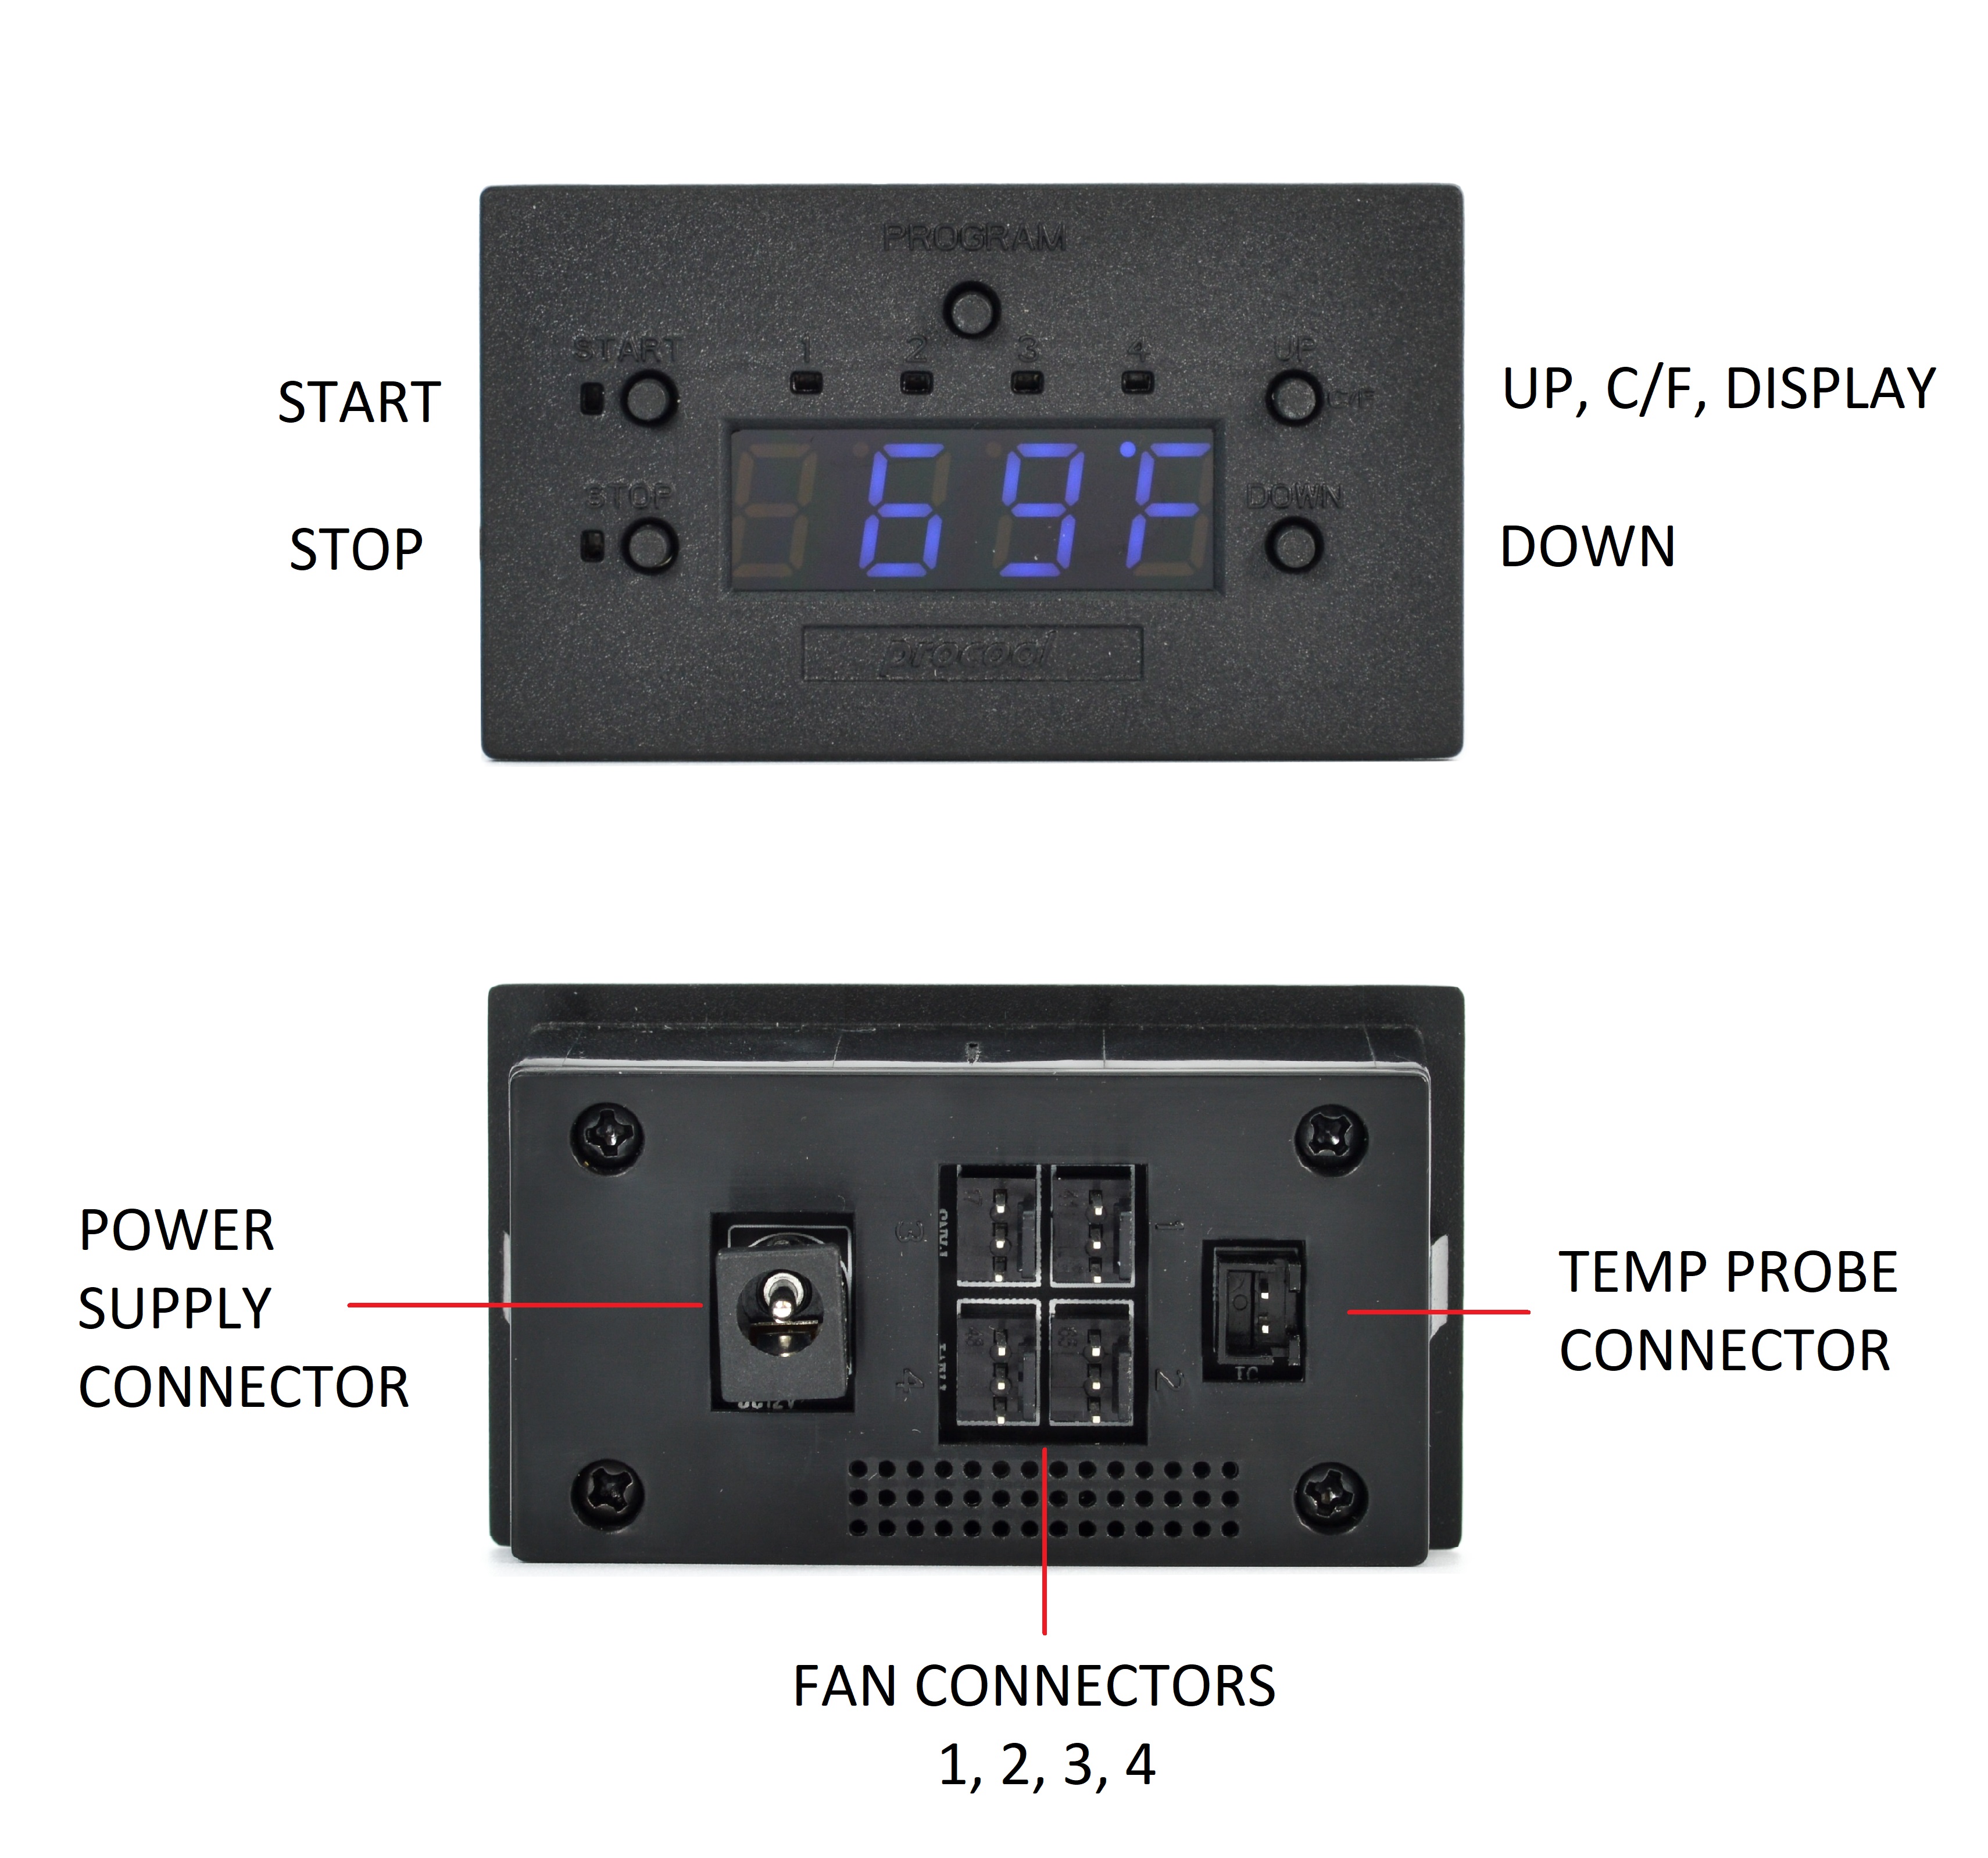 Fan Controller Connections